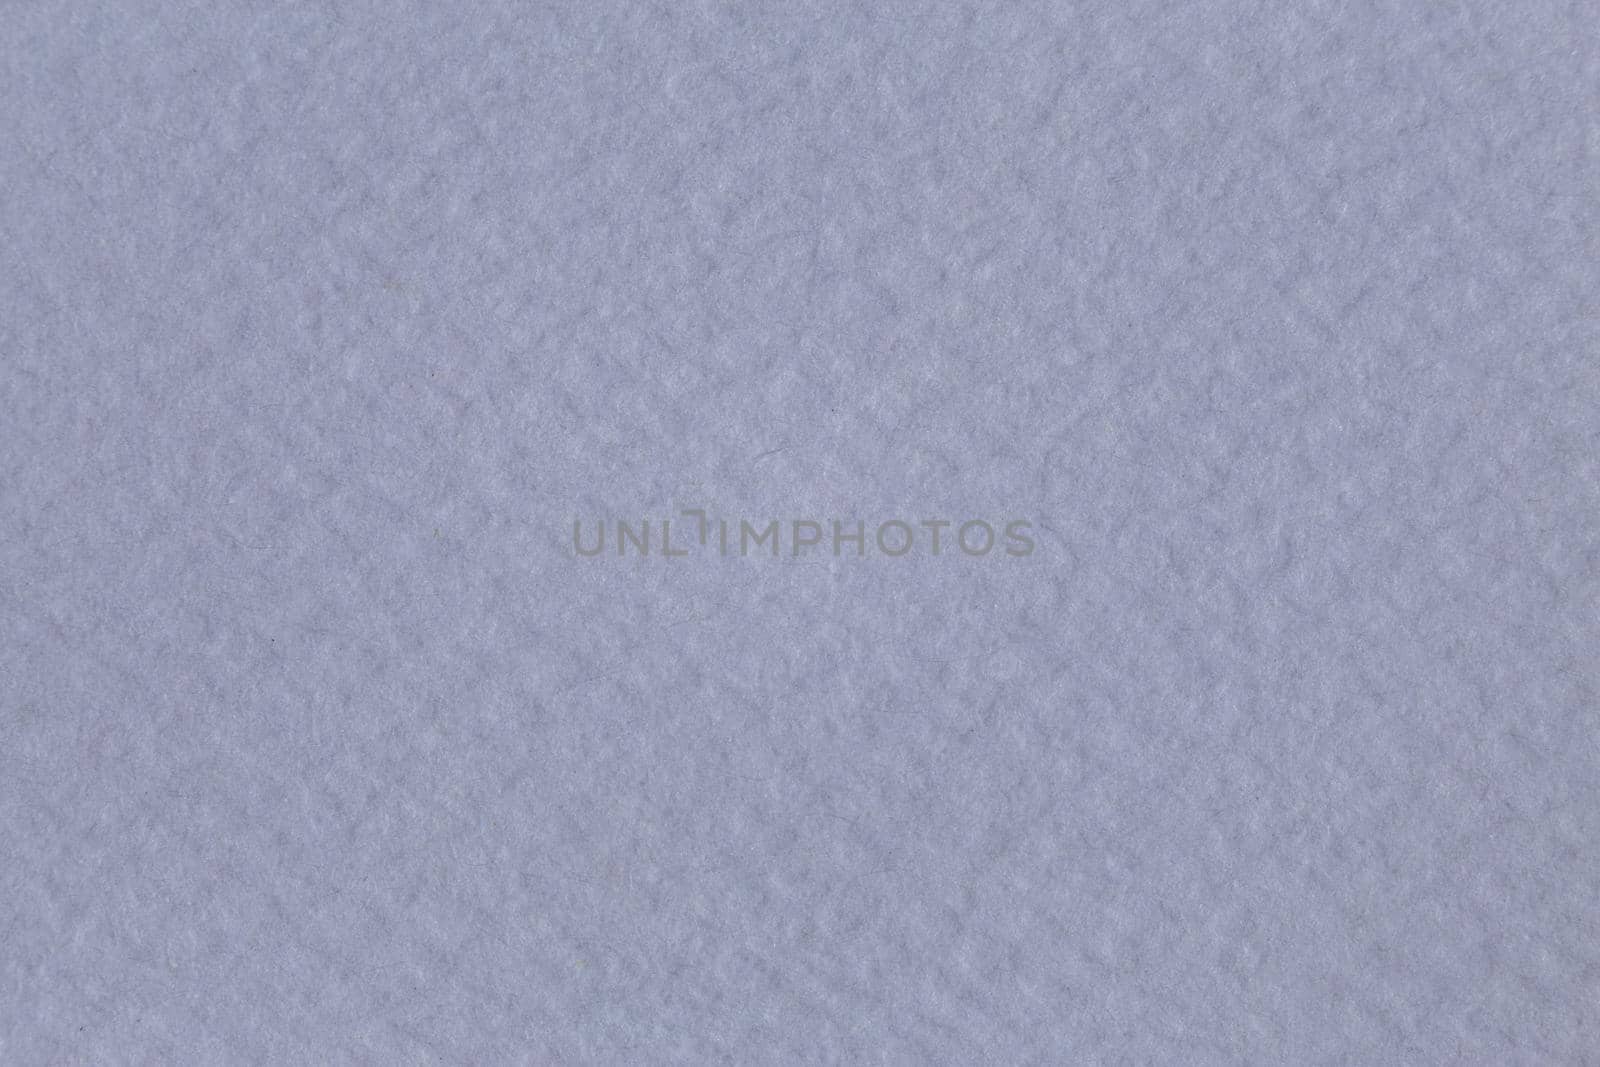 White blank watercolor paper texture, close-up view by clusterx